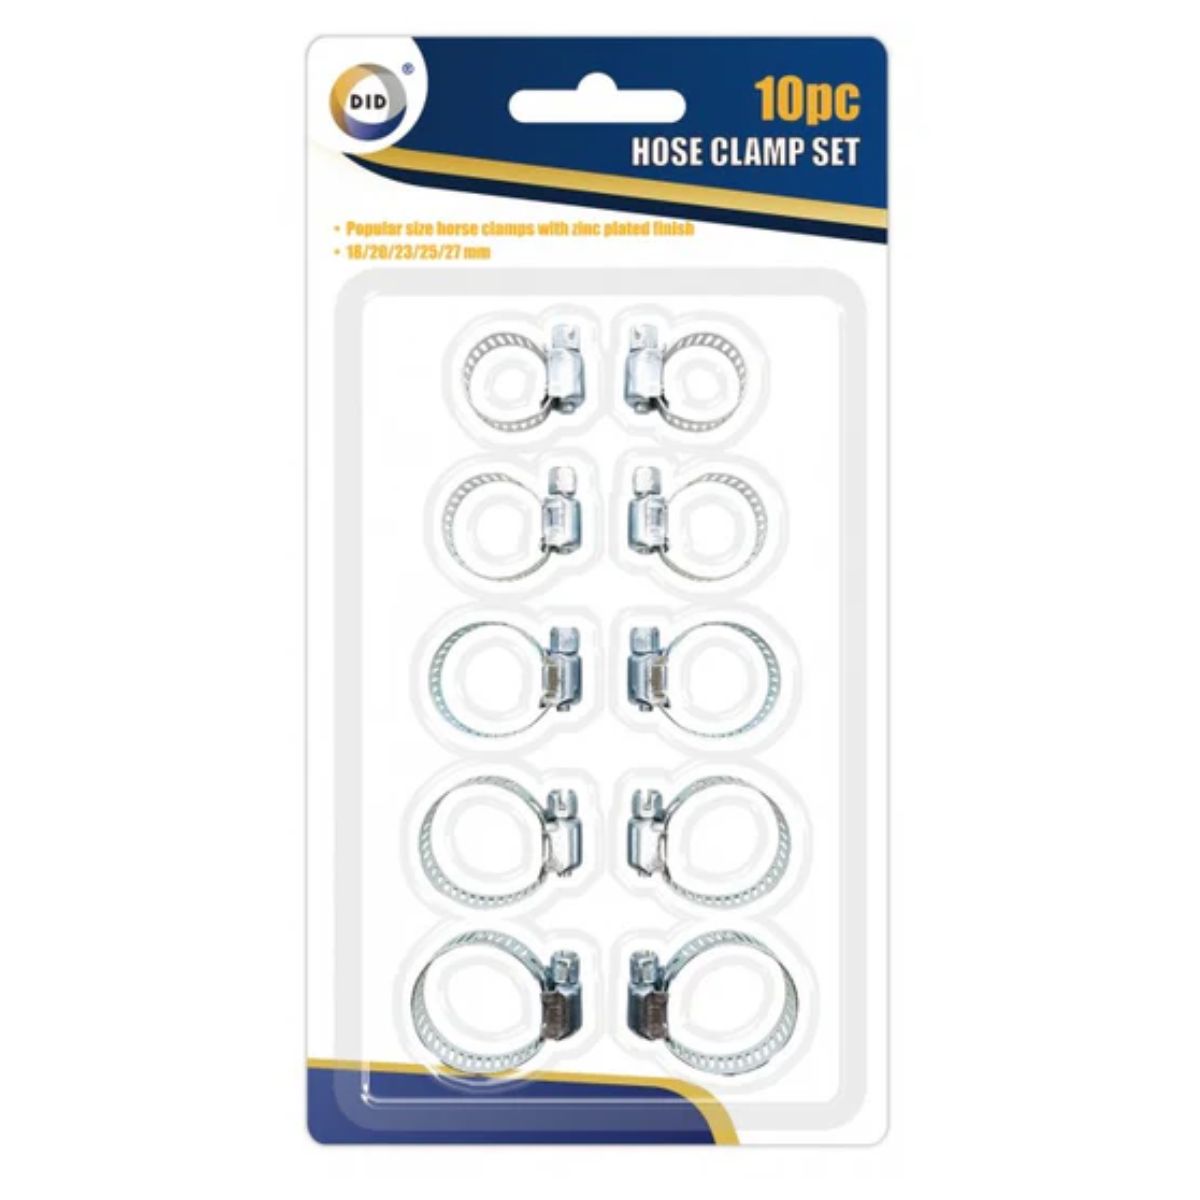 Packaging of a DID Hose Clamp Set - 10pcs with various sizes displayed on a blue and white card.